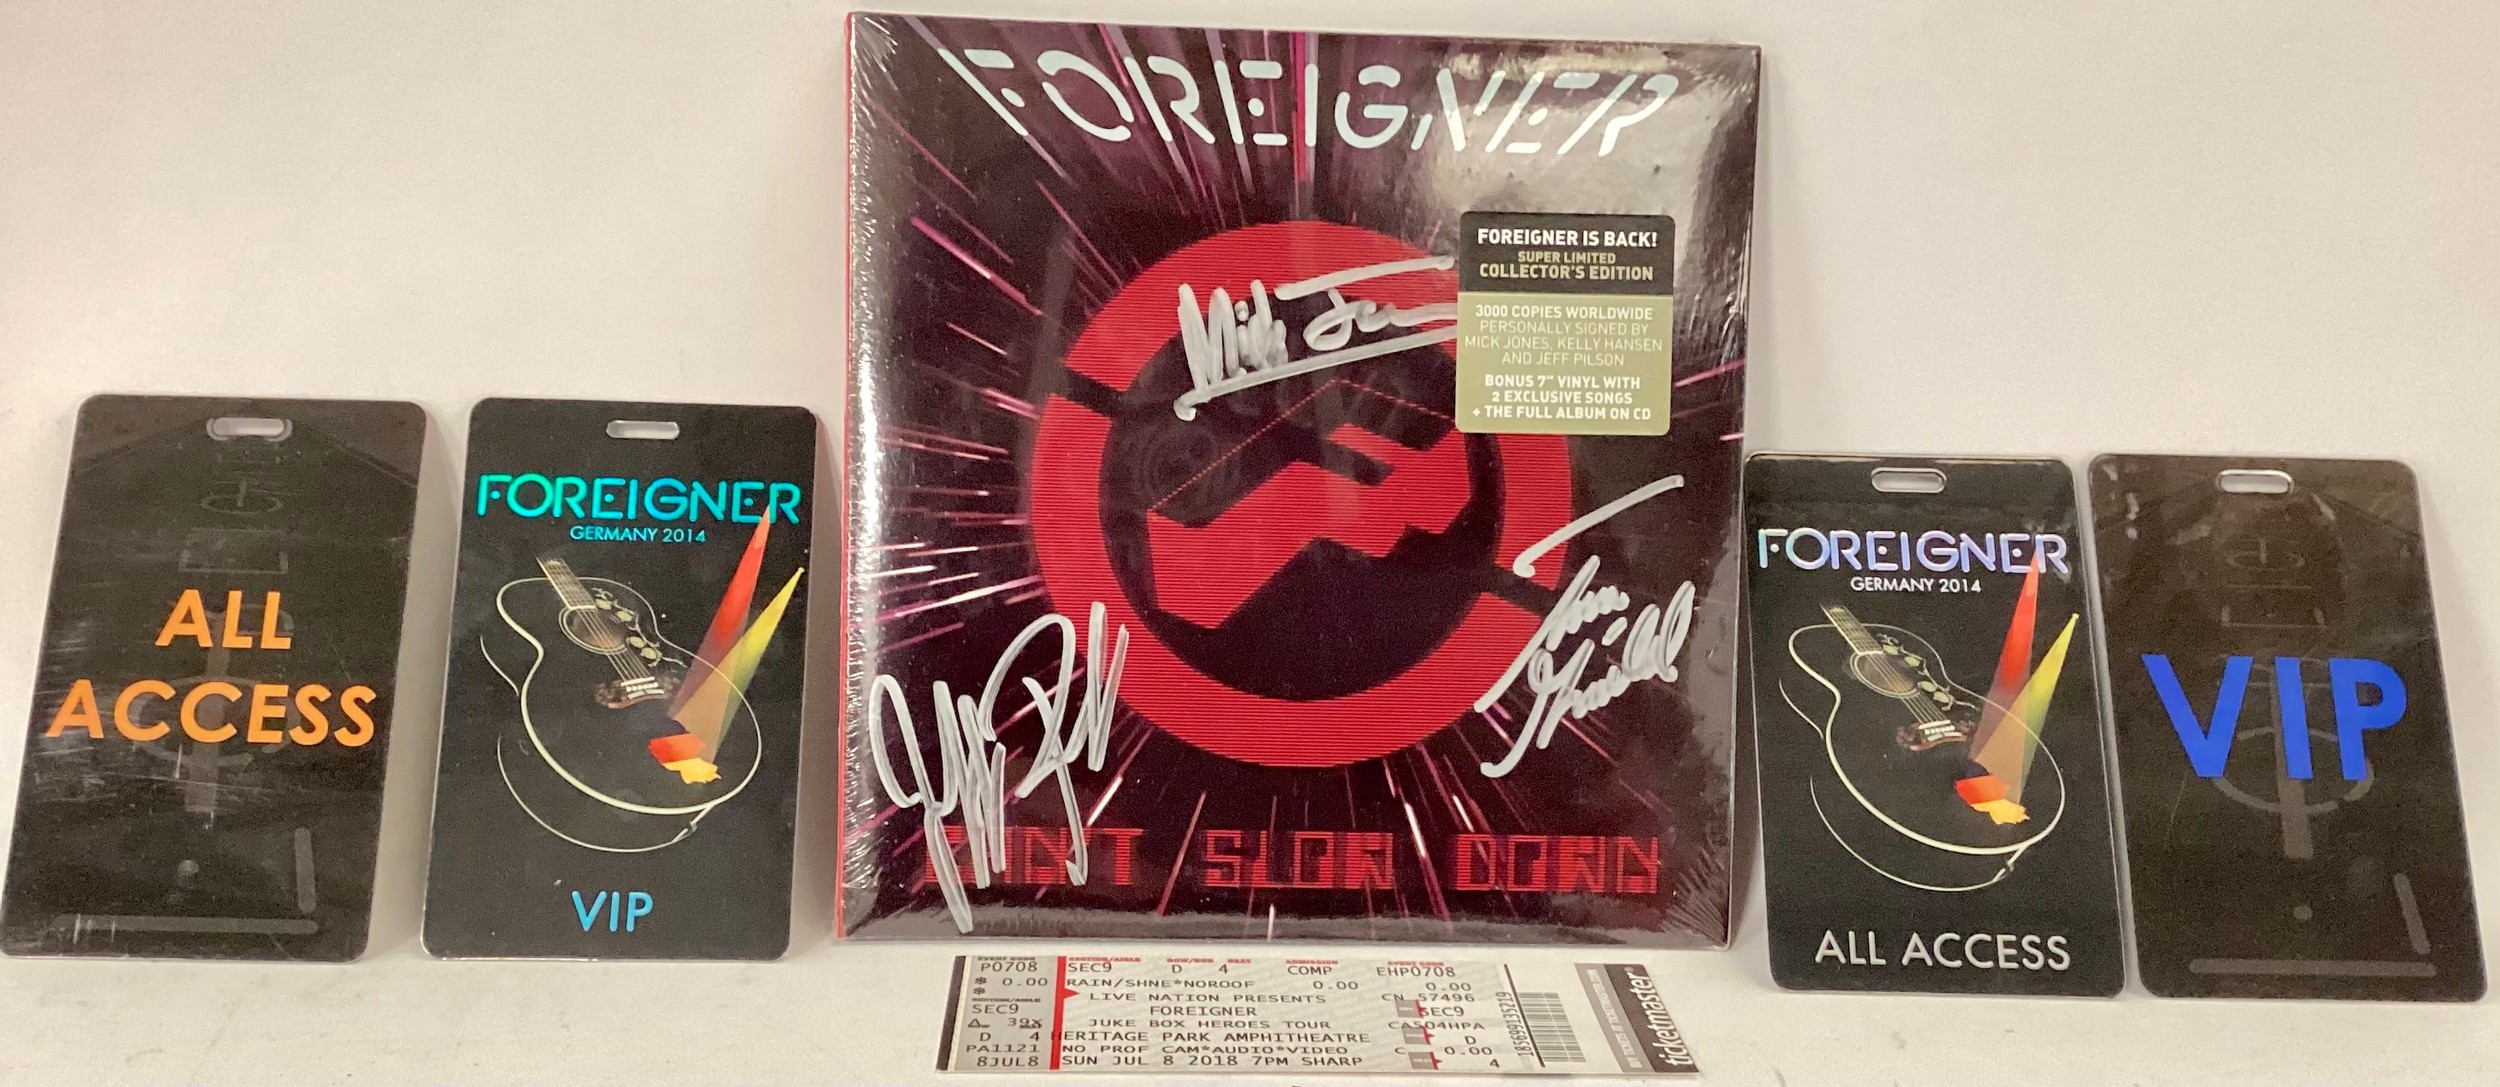 FOREIGNER AUTOGRAPHED LIMITED EDITION SINGLE. Very nice limited 3000 copy of the single signed by